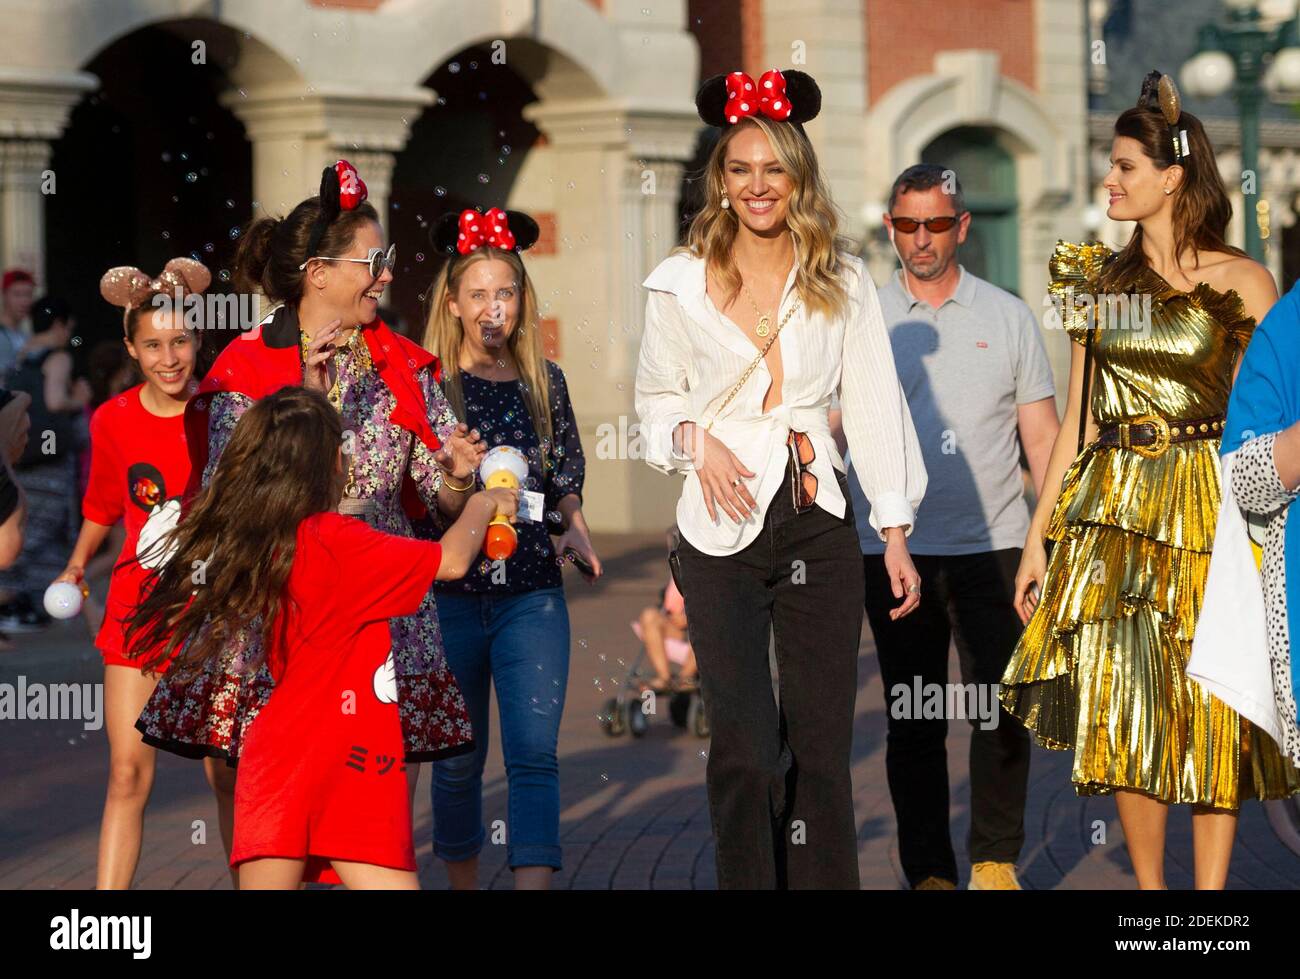 Handout - Charlotte Stockdale,Candice Swanepoel,Isabeli Fontana at CHAOS  exclusive party at Disneyland Paris, which marked the start of Paris Haute  Couture in Disney style in Paris, France on June 30, 2019. Photo